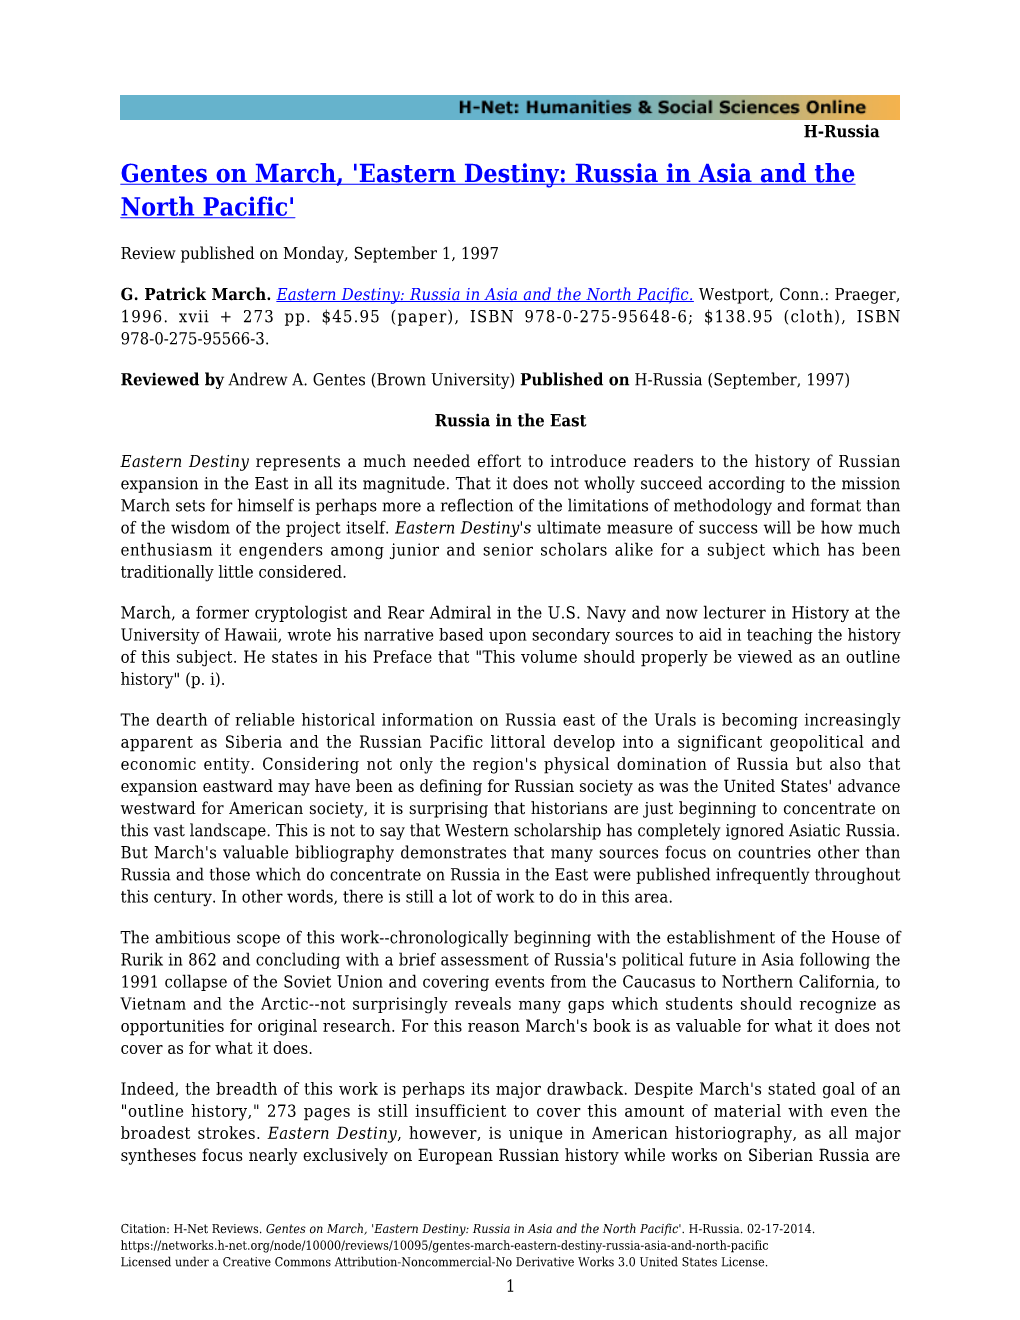 Eastern Destiny: Russia in Asia and the North Pacific'